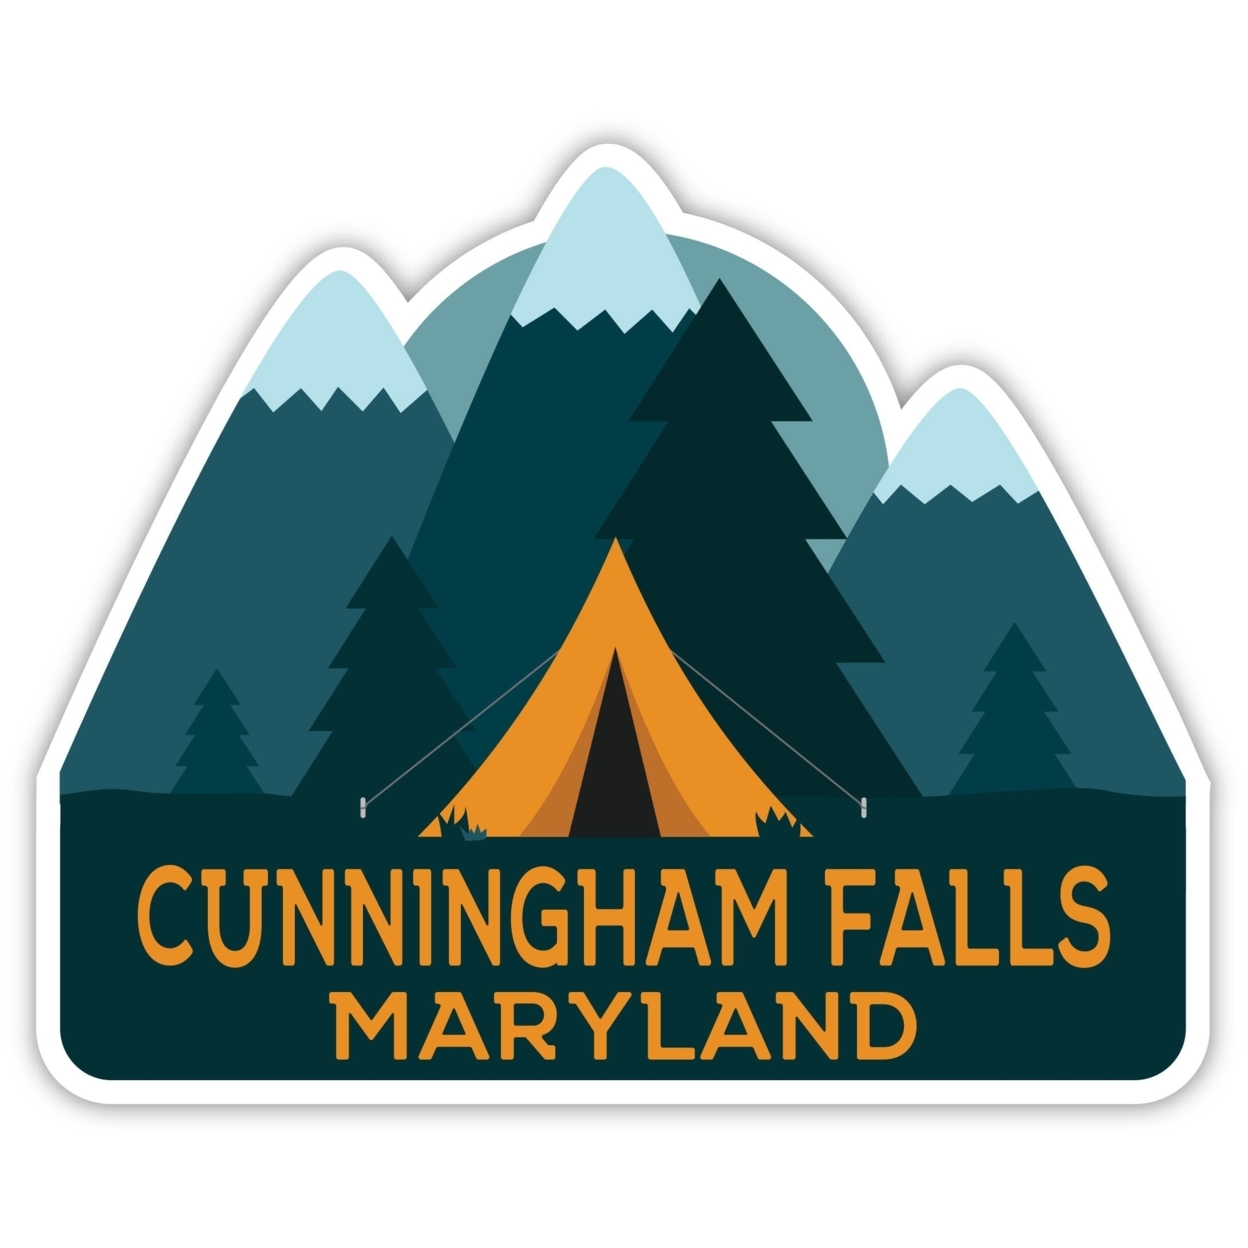 Cunningham Falls Maryland Souvenir Decorative Stickers (Choose Theme And Size) - 4-Pack, 8-Inch, Tent